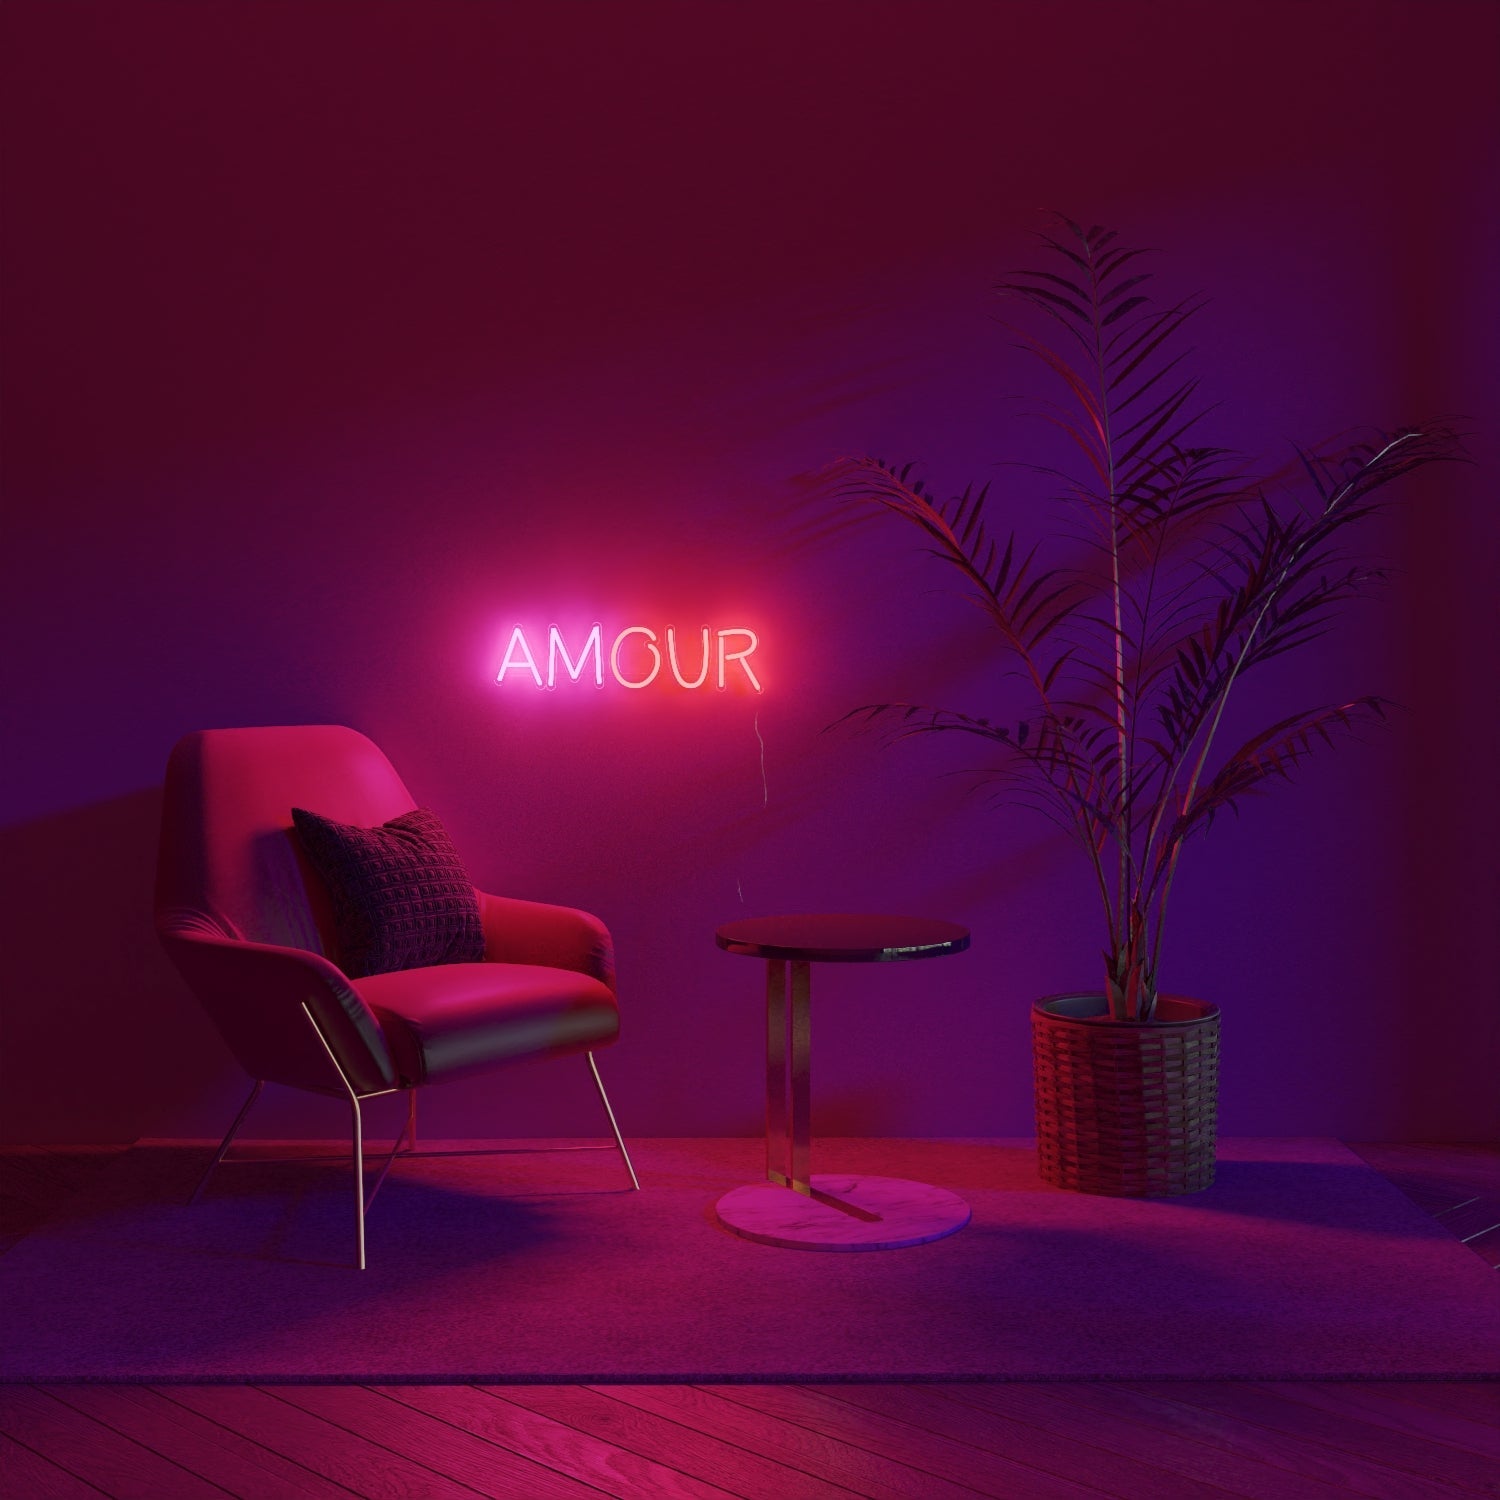 Our Amour, Neon Tabela - Neonbir